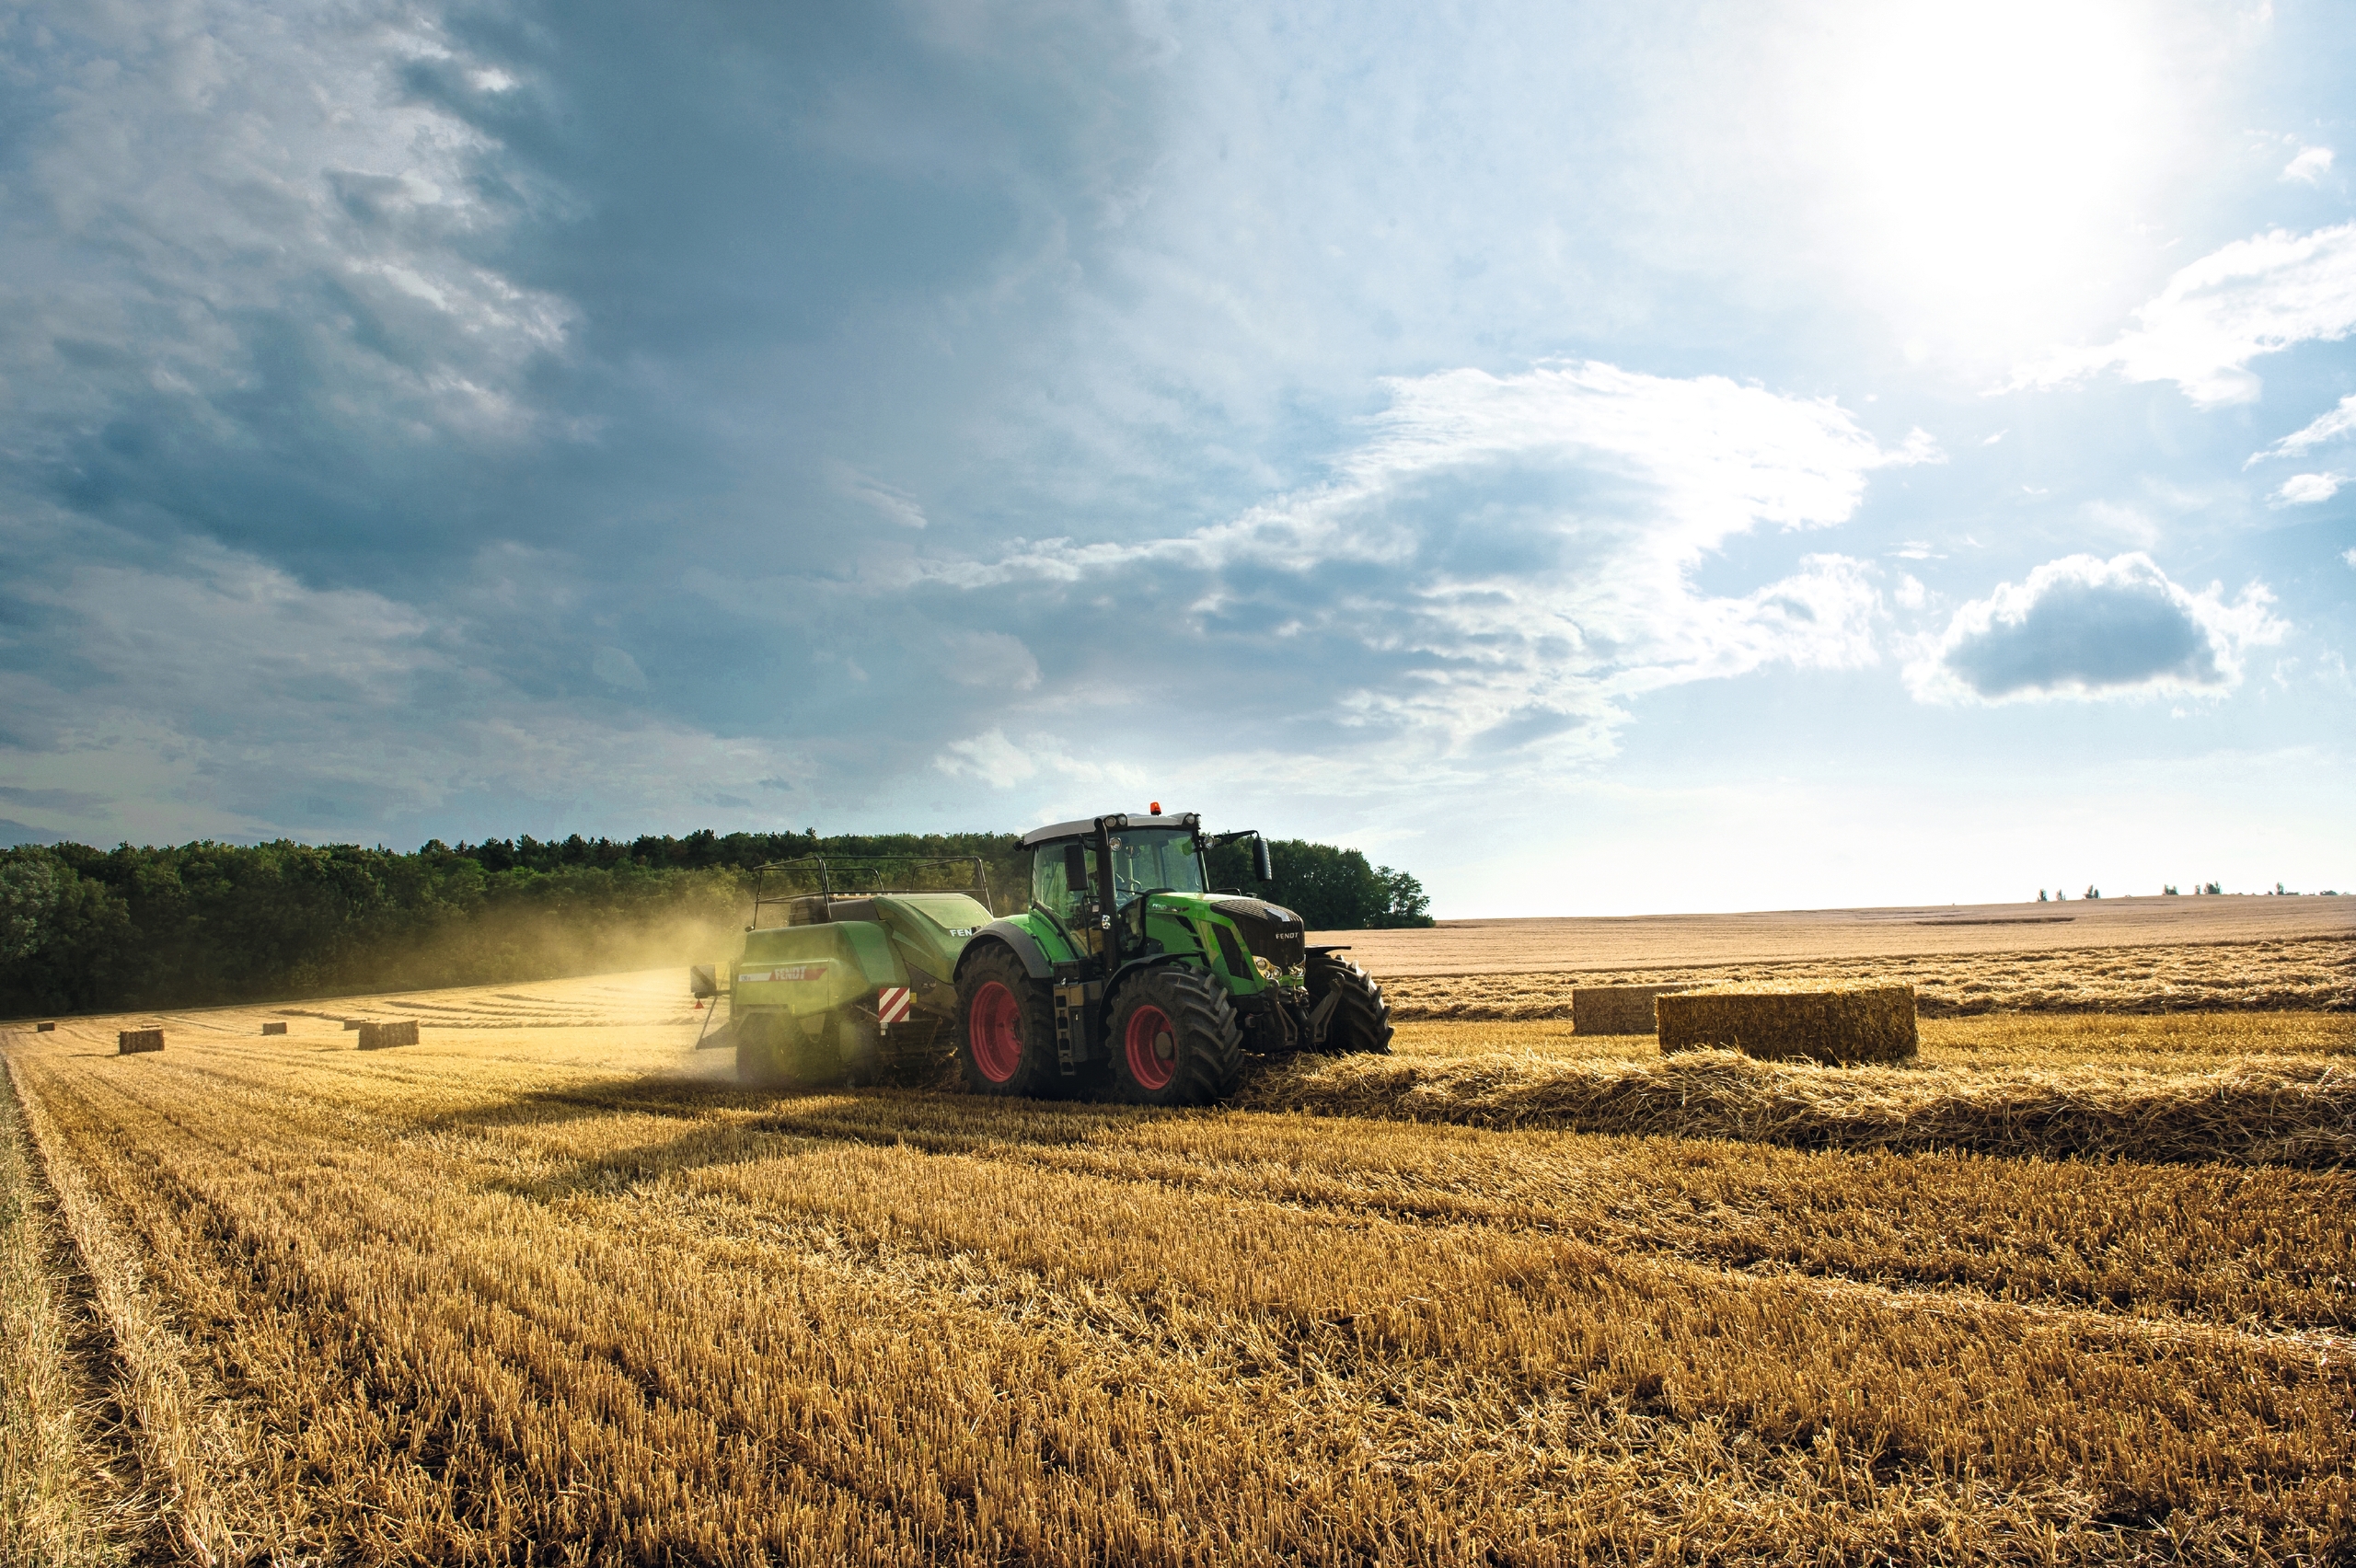 A new generation of Fendt large square balers